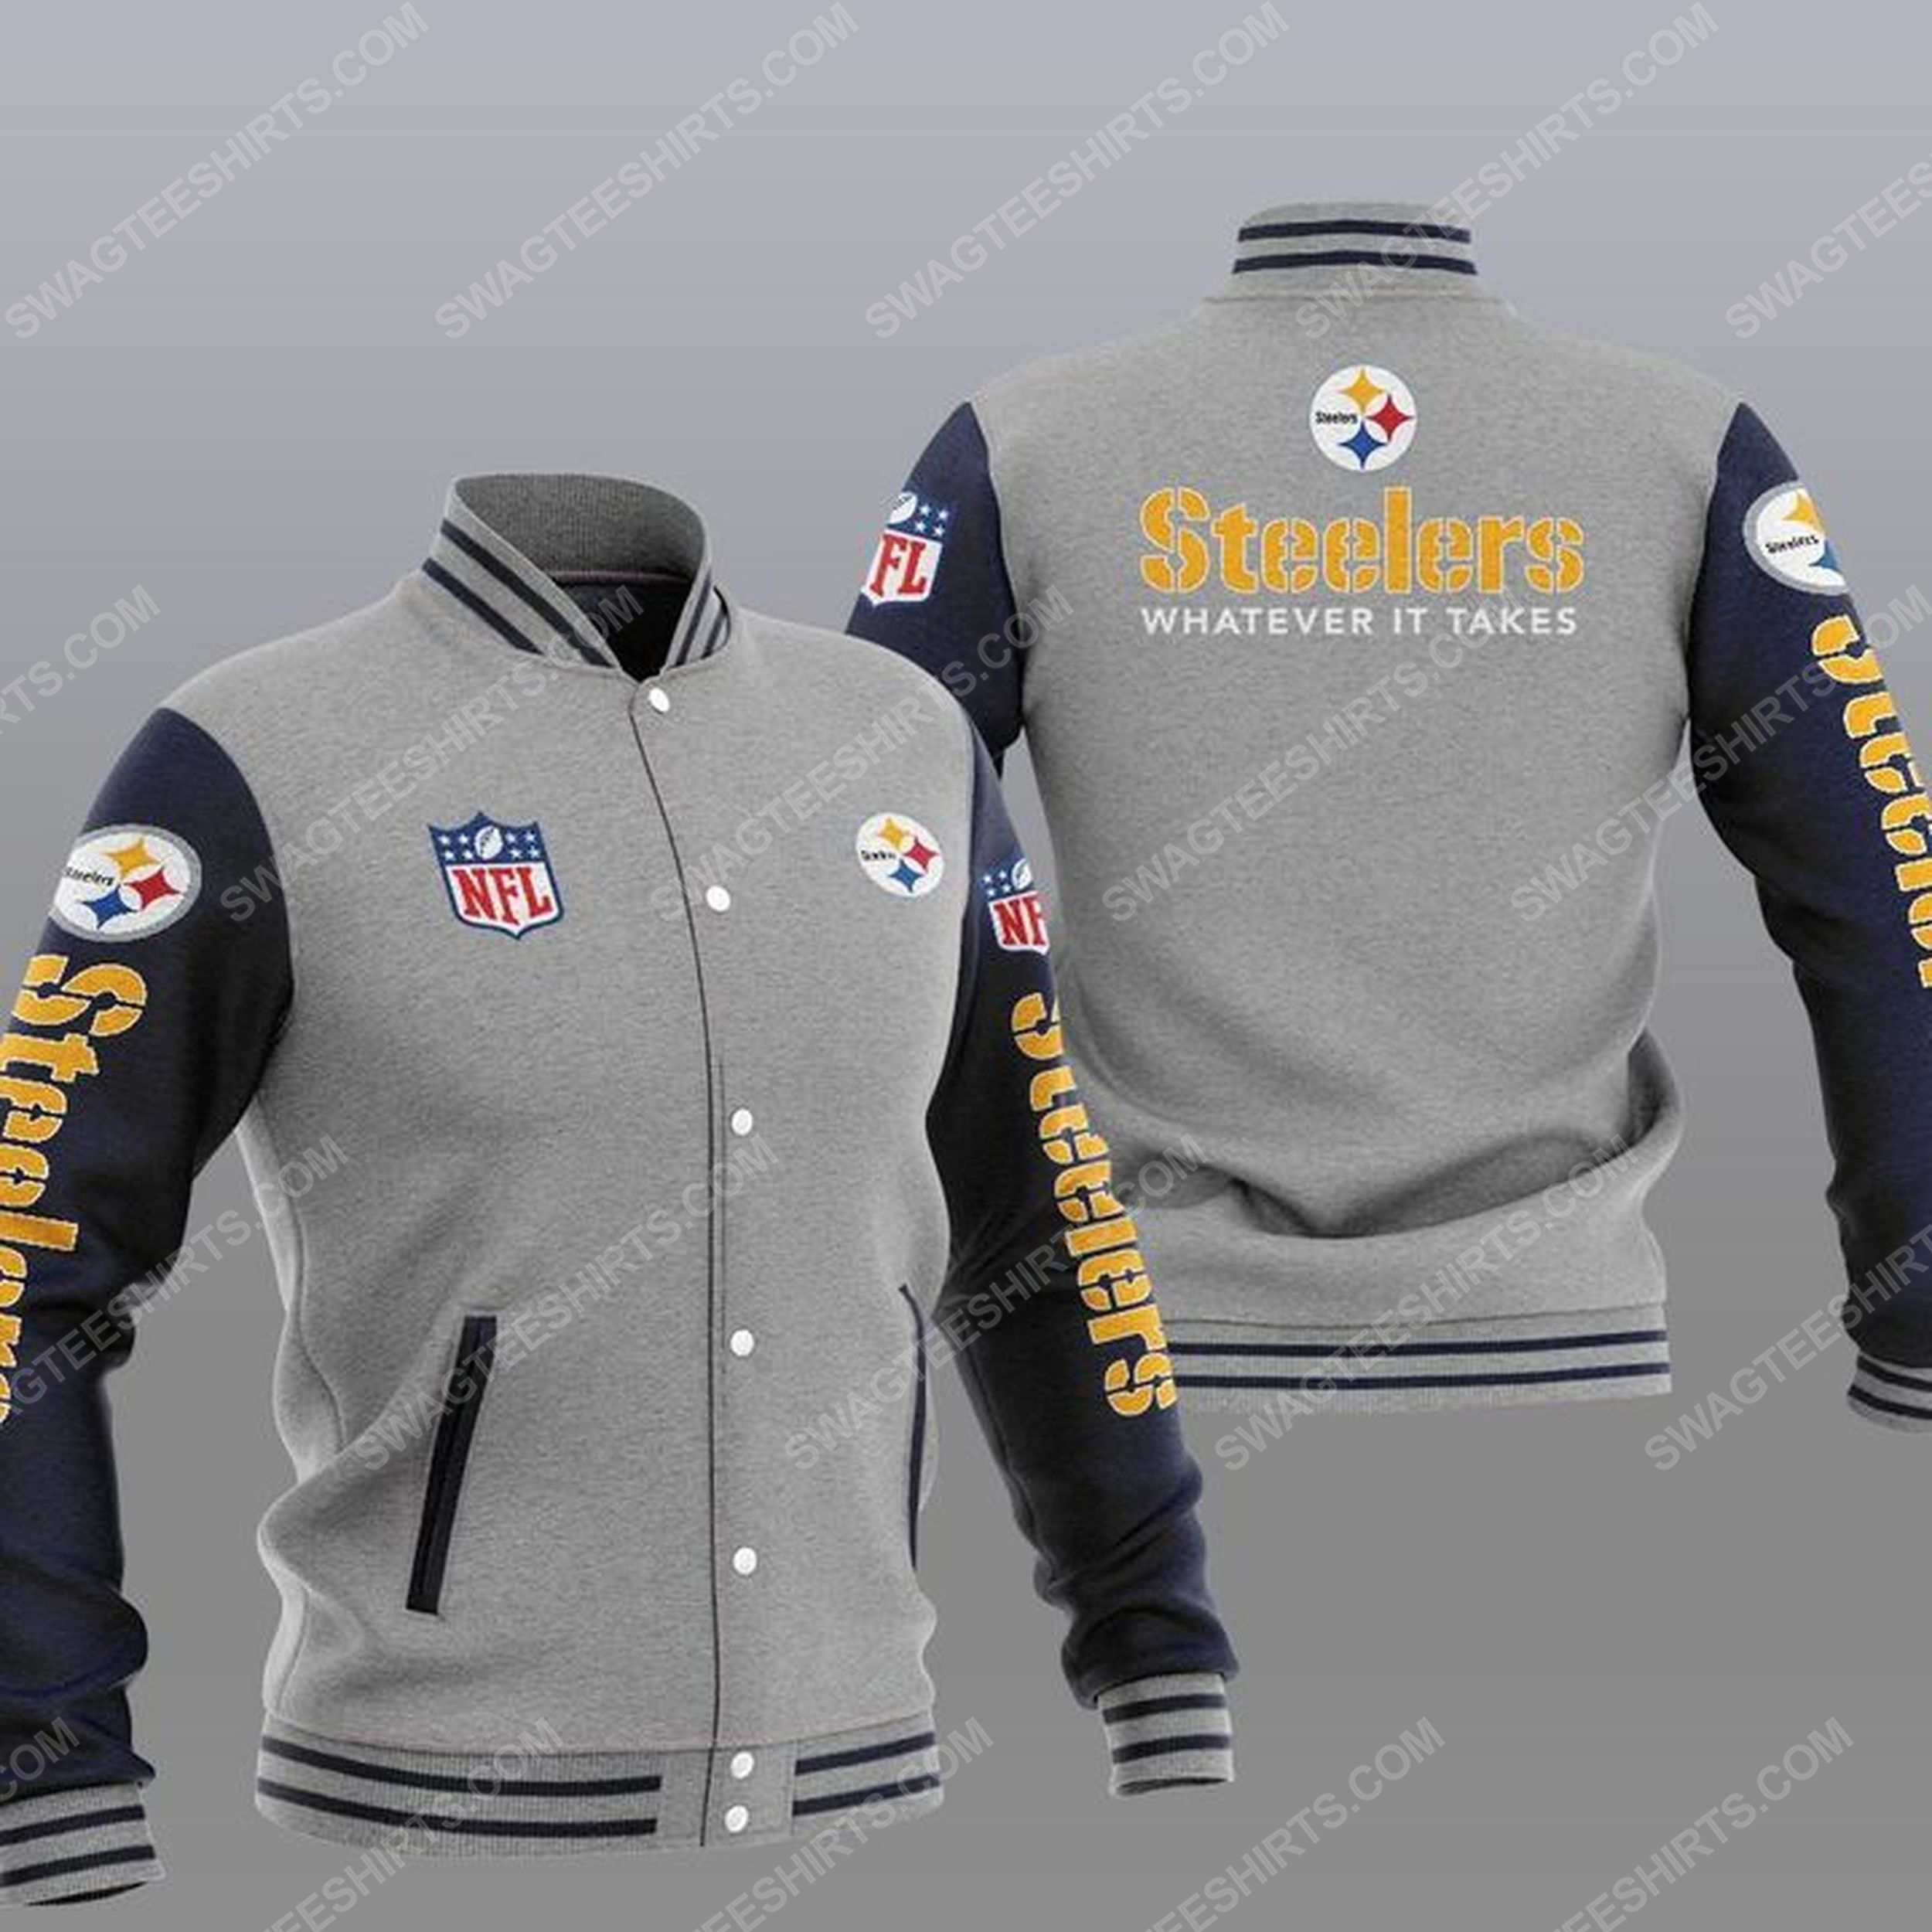 Pittsburgh steelers whatever it takes all over print baseball jacket - gray 1